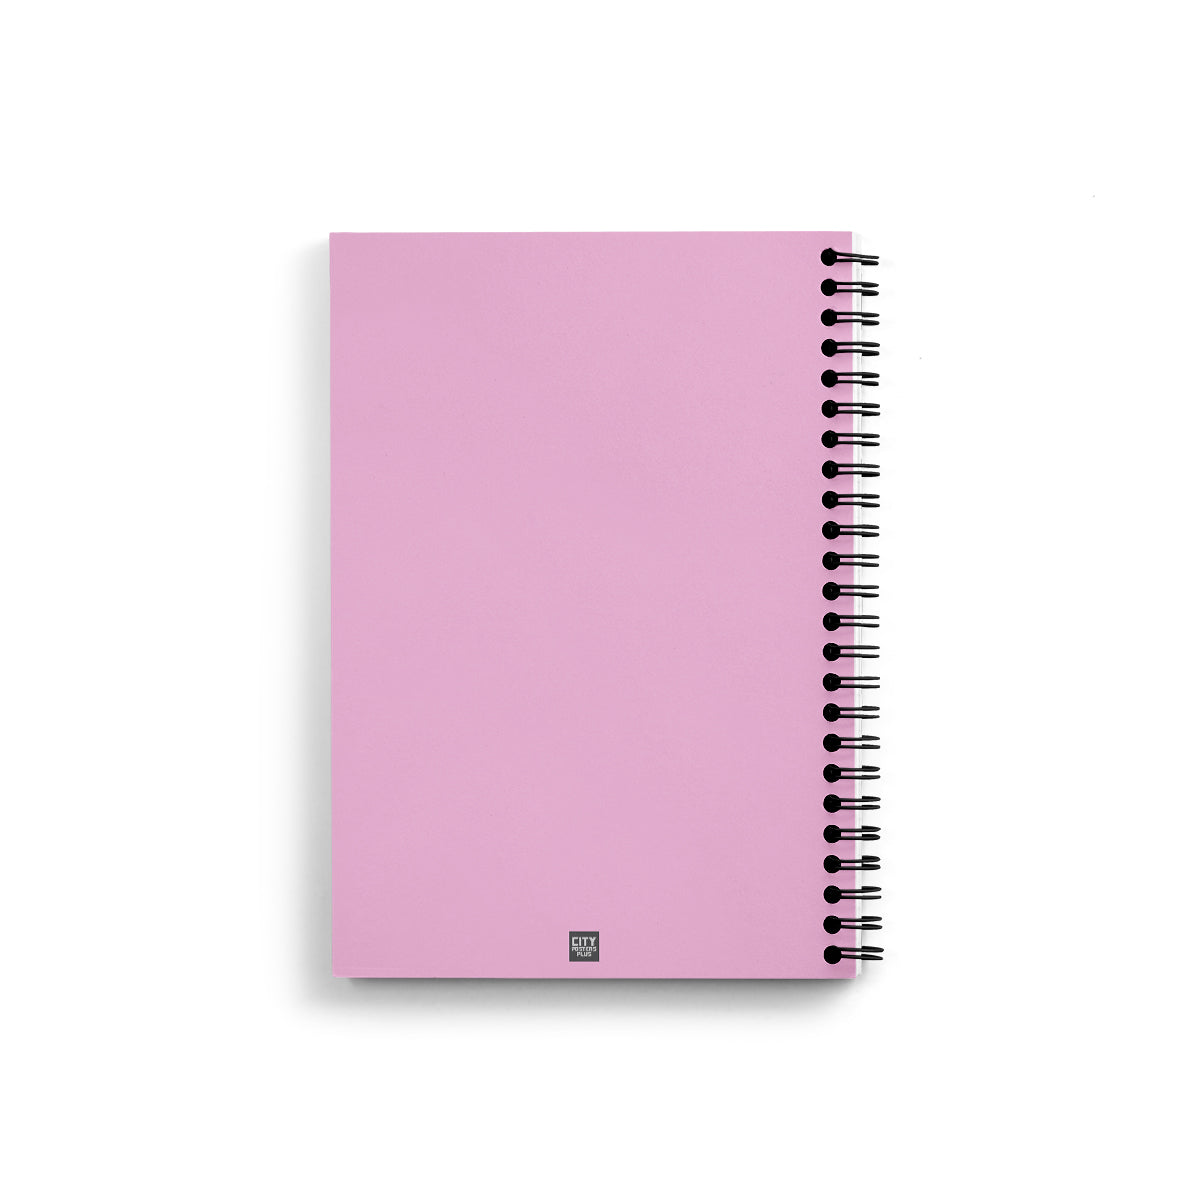 51 Number Notebook (Light Pink, A5 Size, 100 Pages, Ruled, 4 Pack)